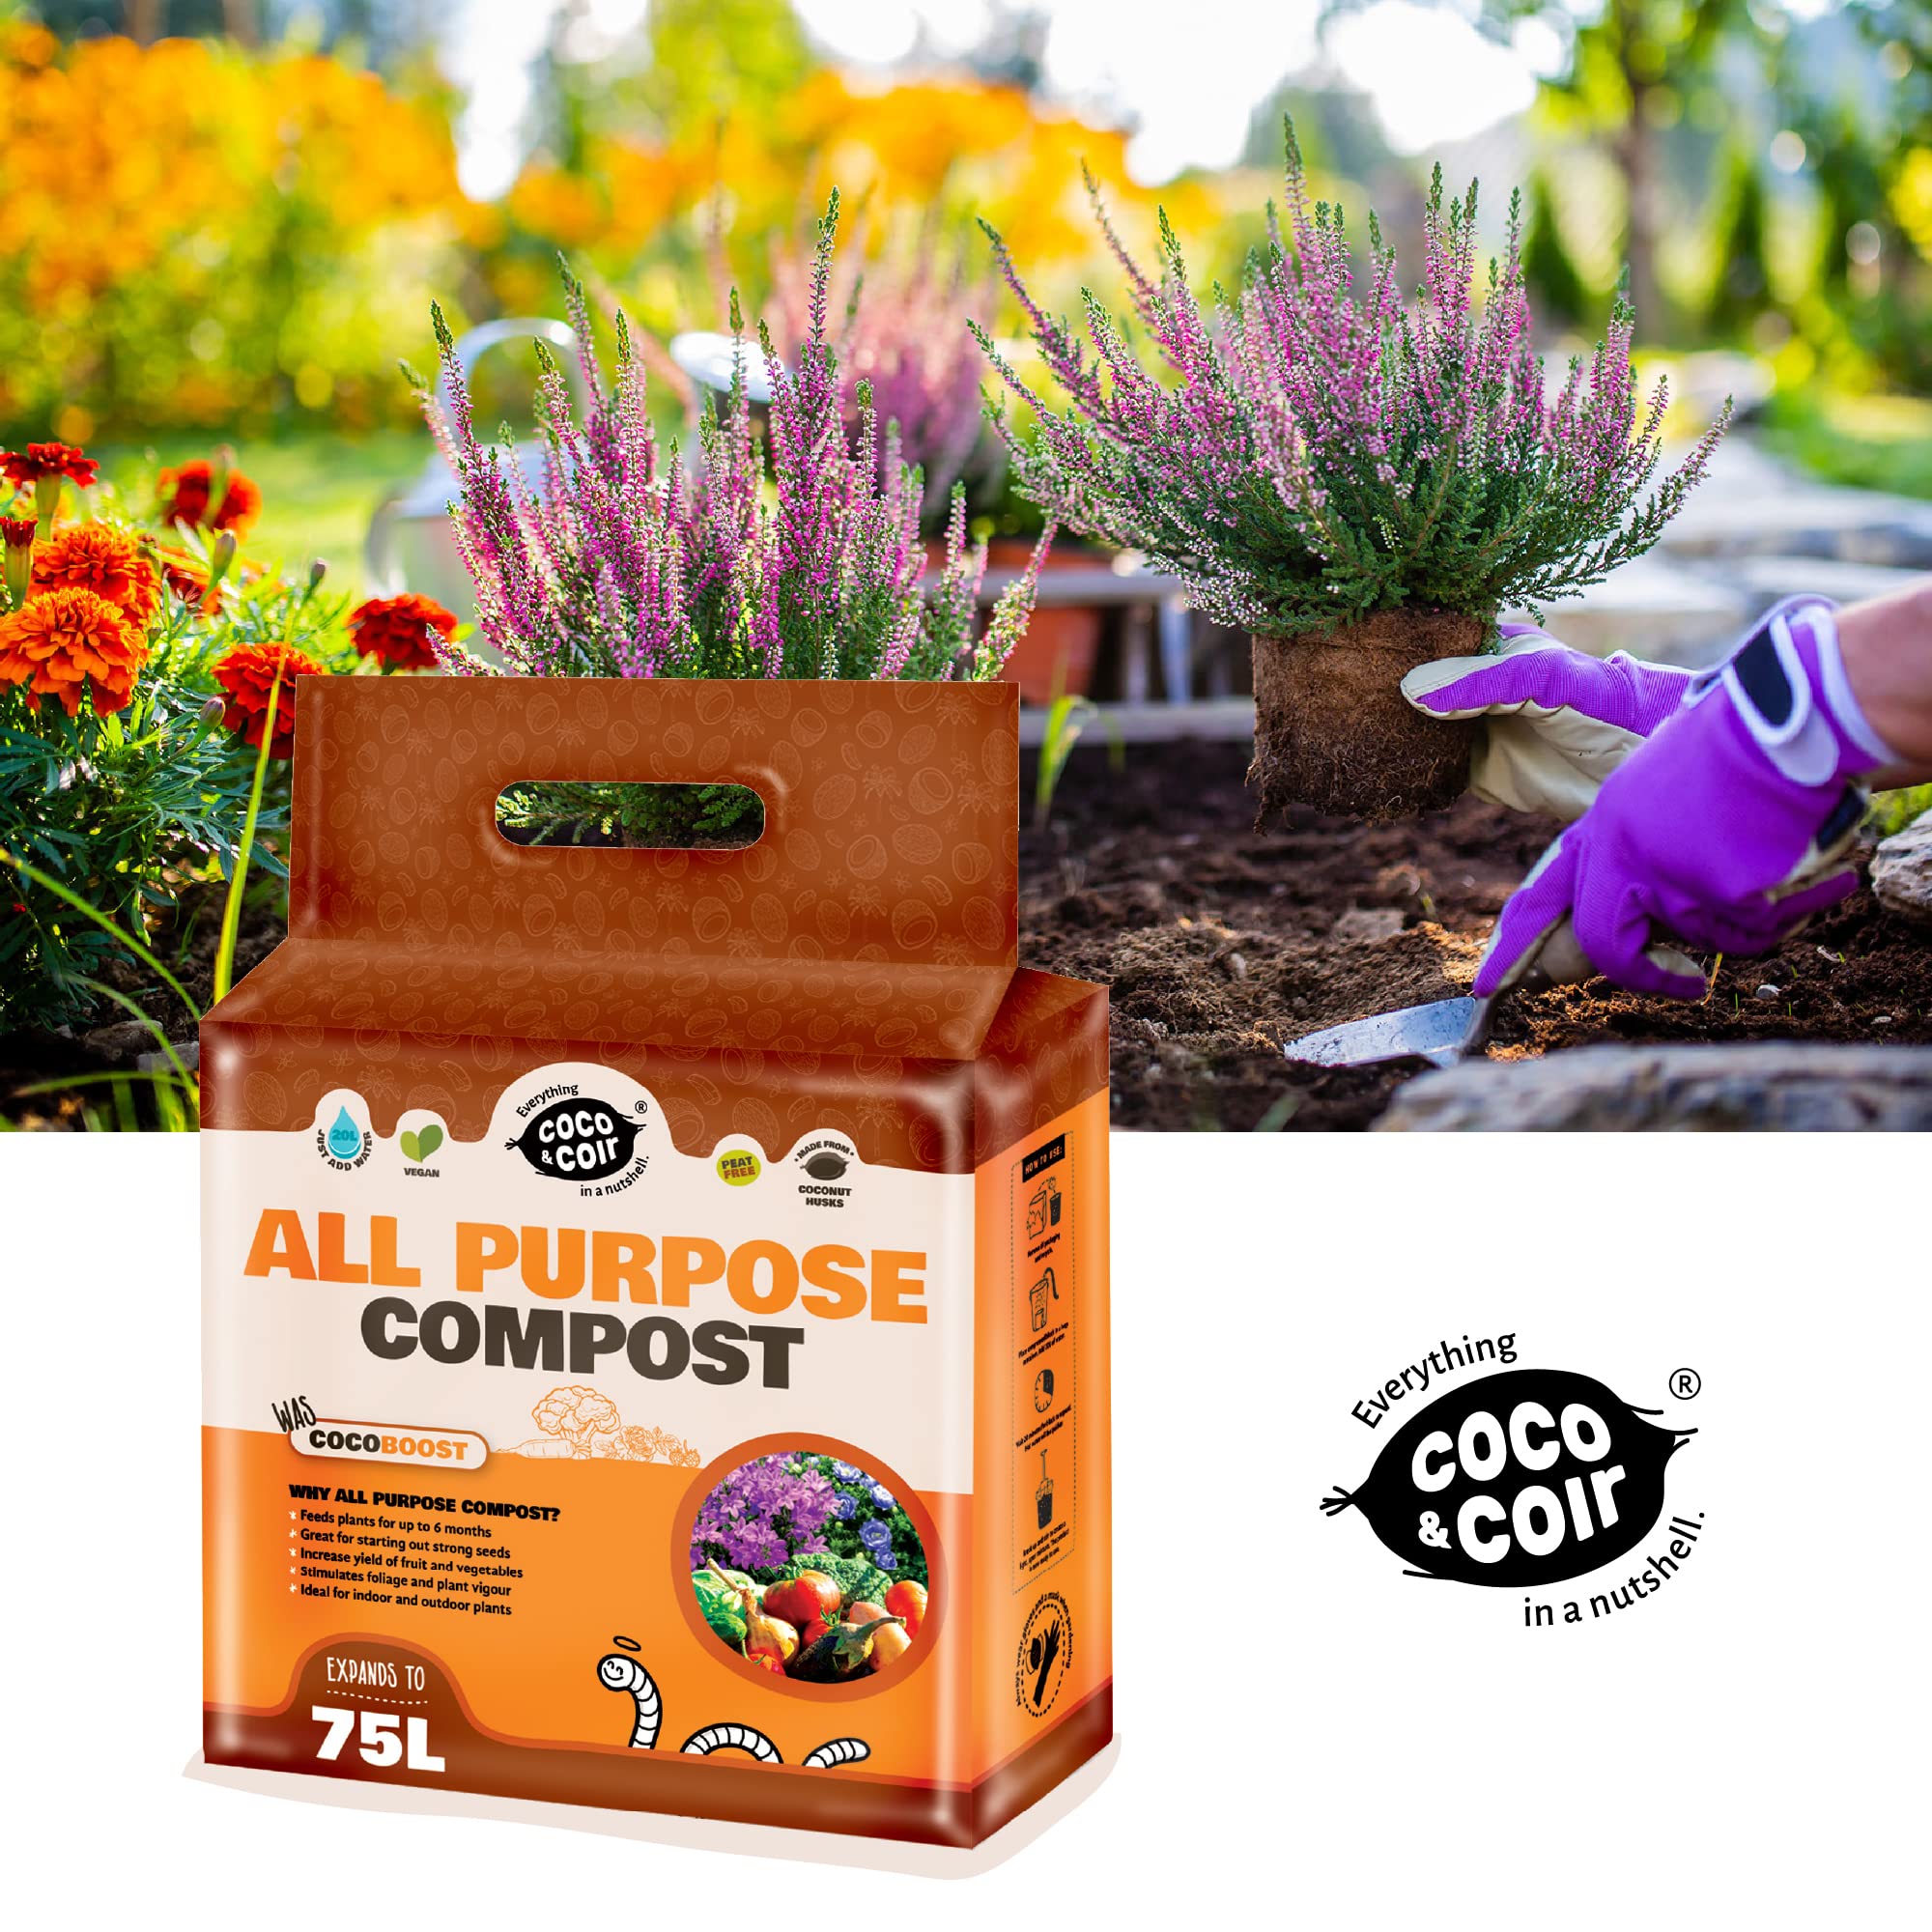 Coco & Coir All Purpose Compost. Peat-free Coco Soil for Plants Indoors. Potting Soil Fertilised with NPK - Coco Boost (75L)